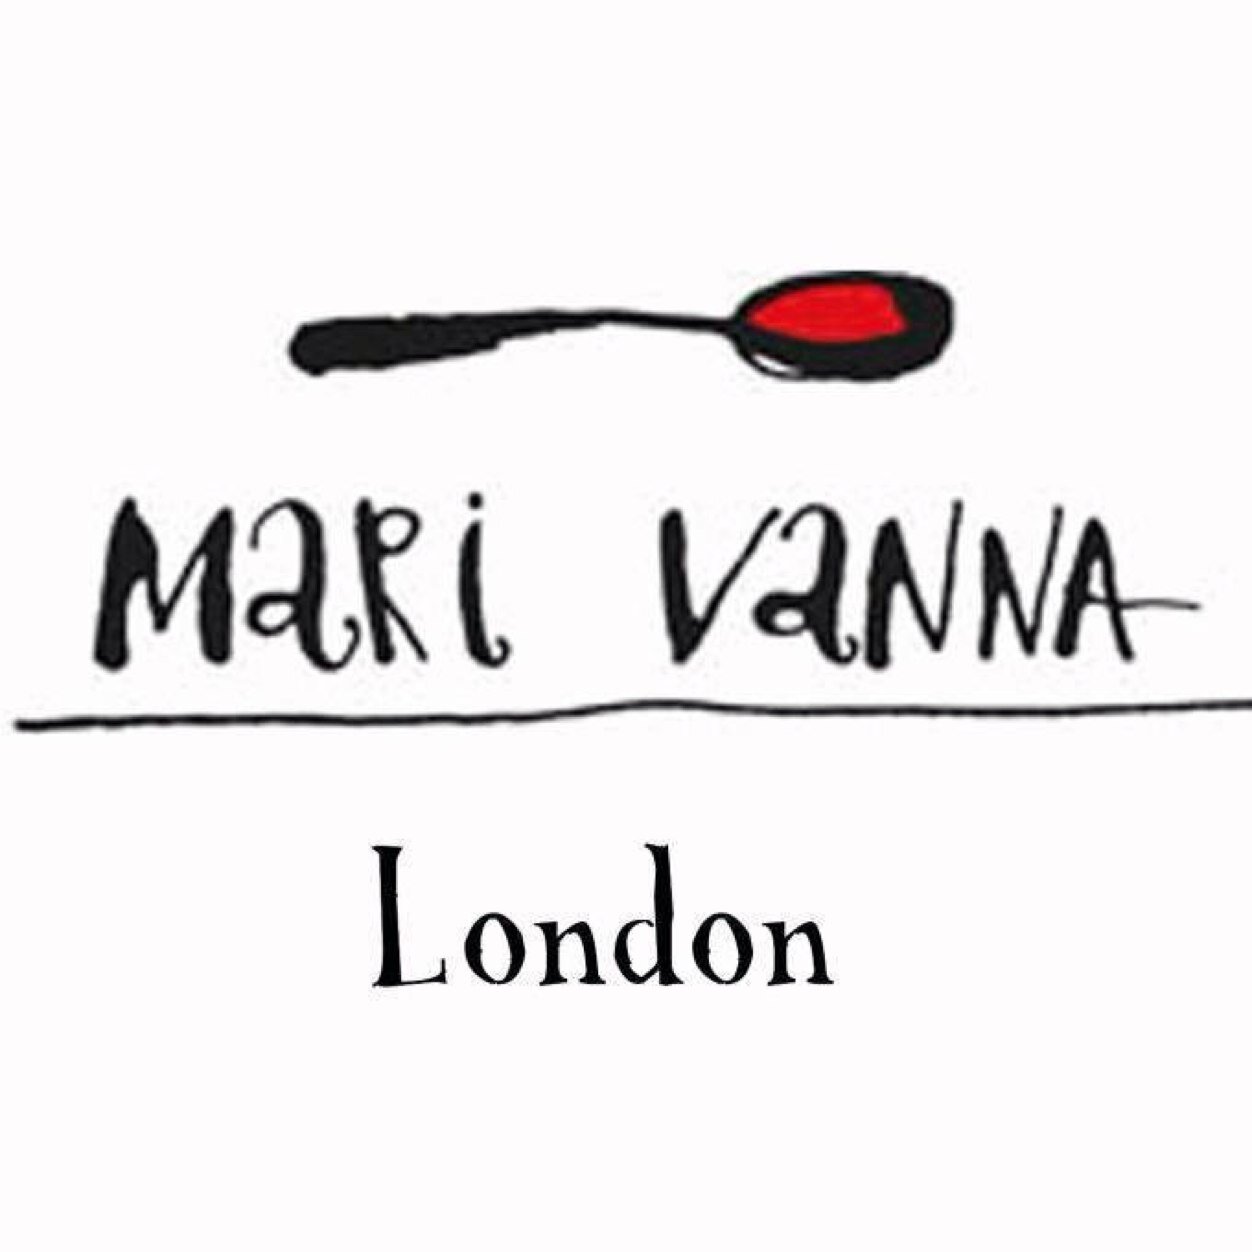 Russian restaurant for any time, where one can meet friends, eat at leisure and feel at home. Welcome! FB: Mari Vanna London Knightsbridge Official